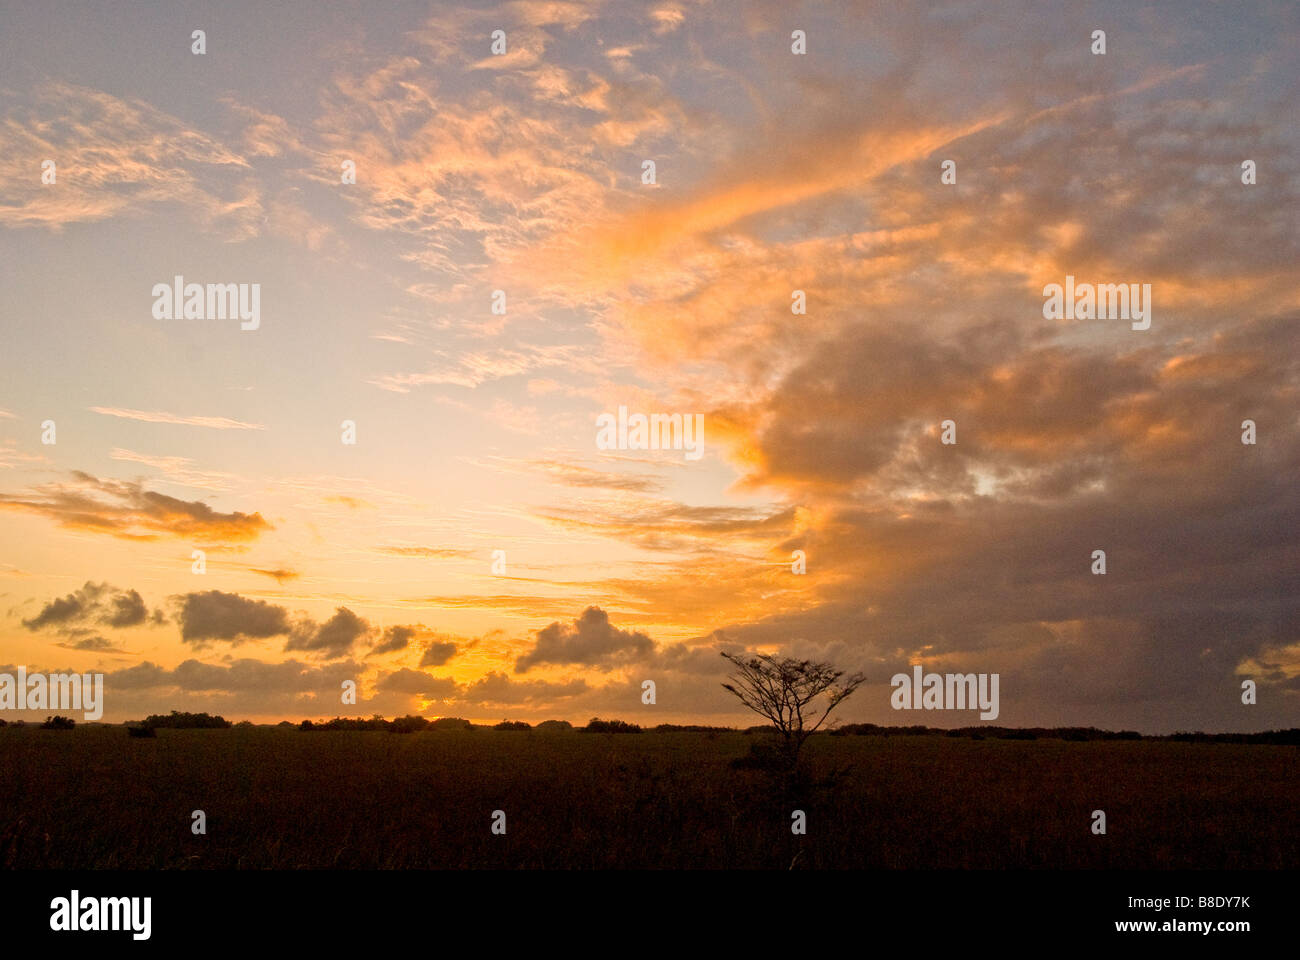 Sunset at Everglades National Park scenic landscape emphasizing open vistas with one small dwarf cypress tree Stock Photo